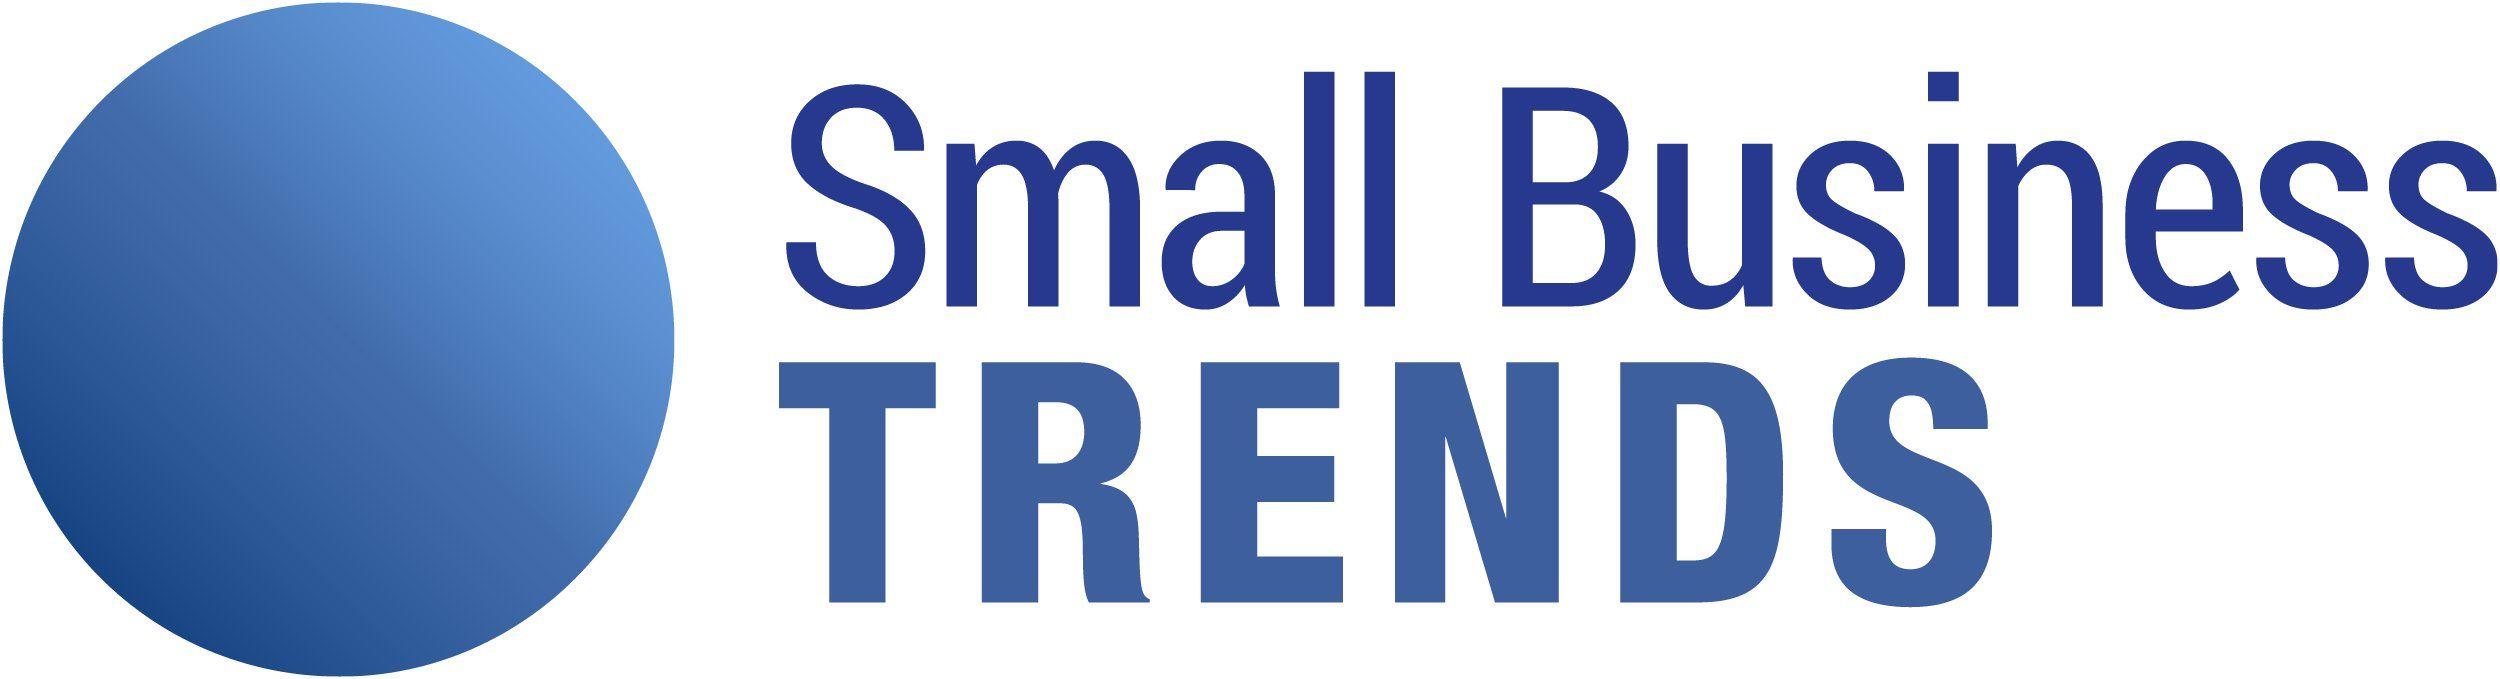 Small Business Logo - Small Business Trends Logo Business Trends